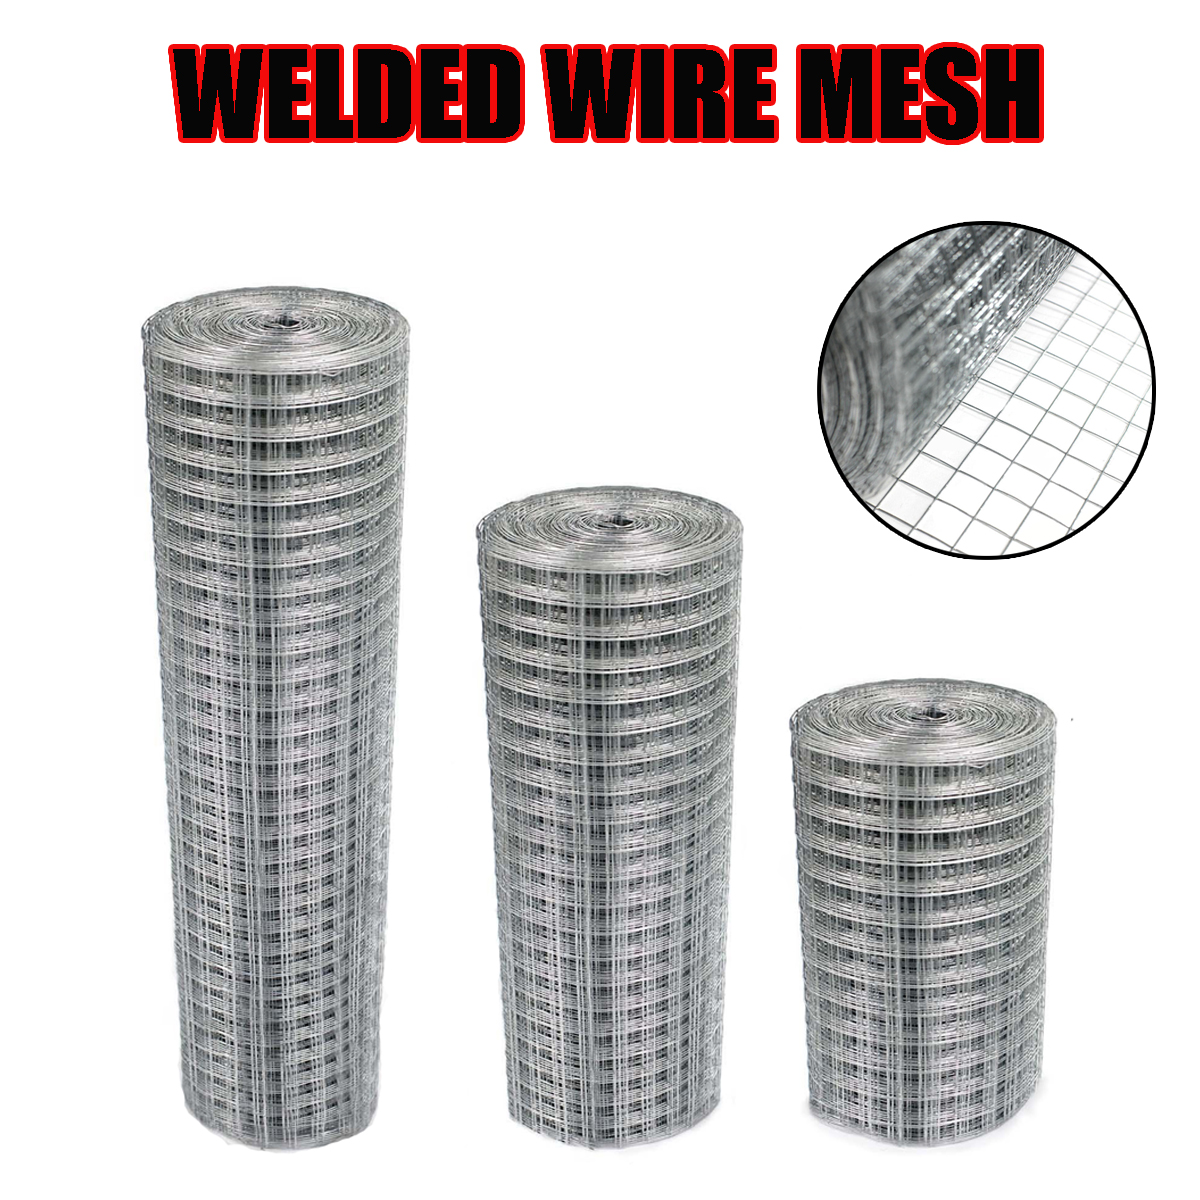 Welded-Galvanised-Wire-Mesh-Fence-1x1-Inch-Aviary-Rabbit-Hutch-Chicken-Coop-Pet-1403161-1